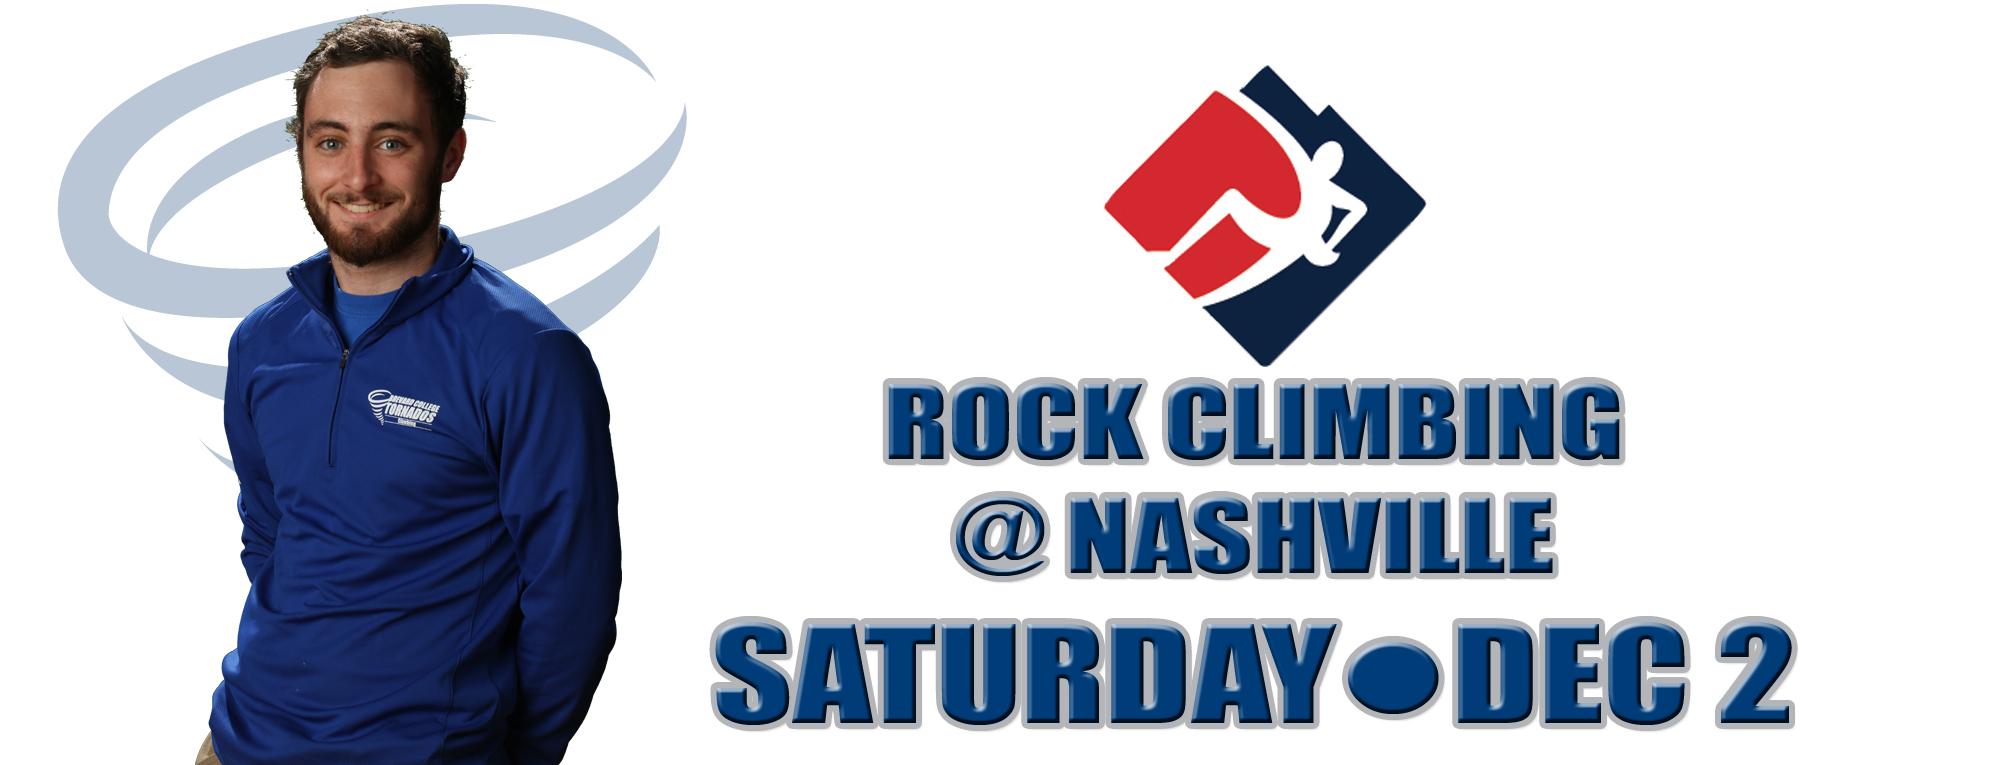 Brevard Rock Climbers set to compete in Nashville